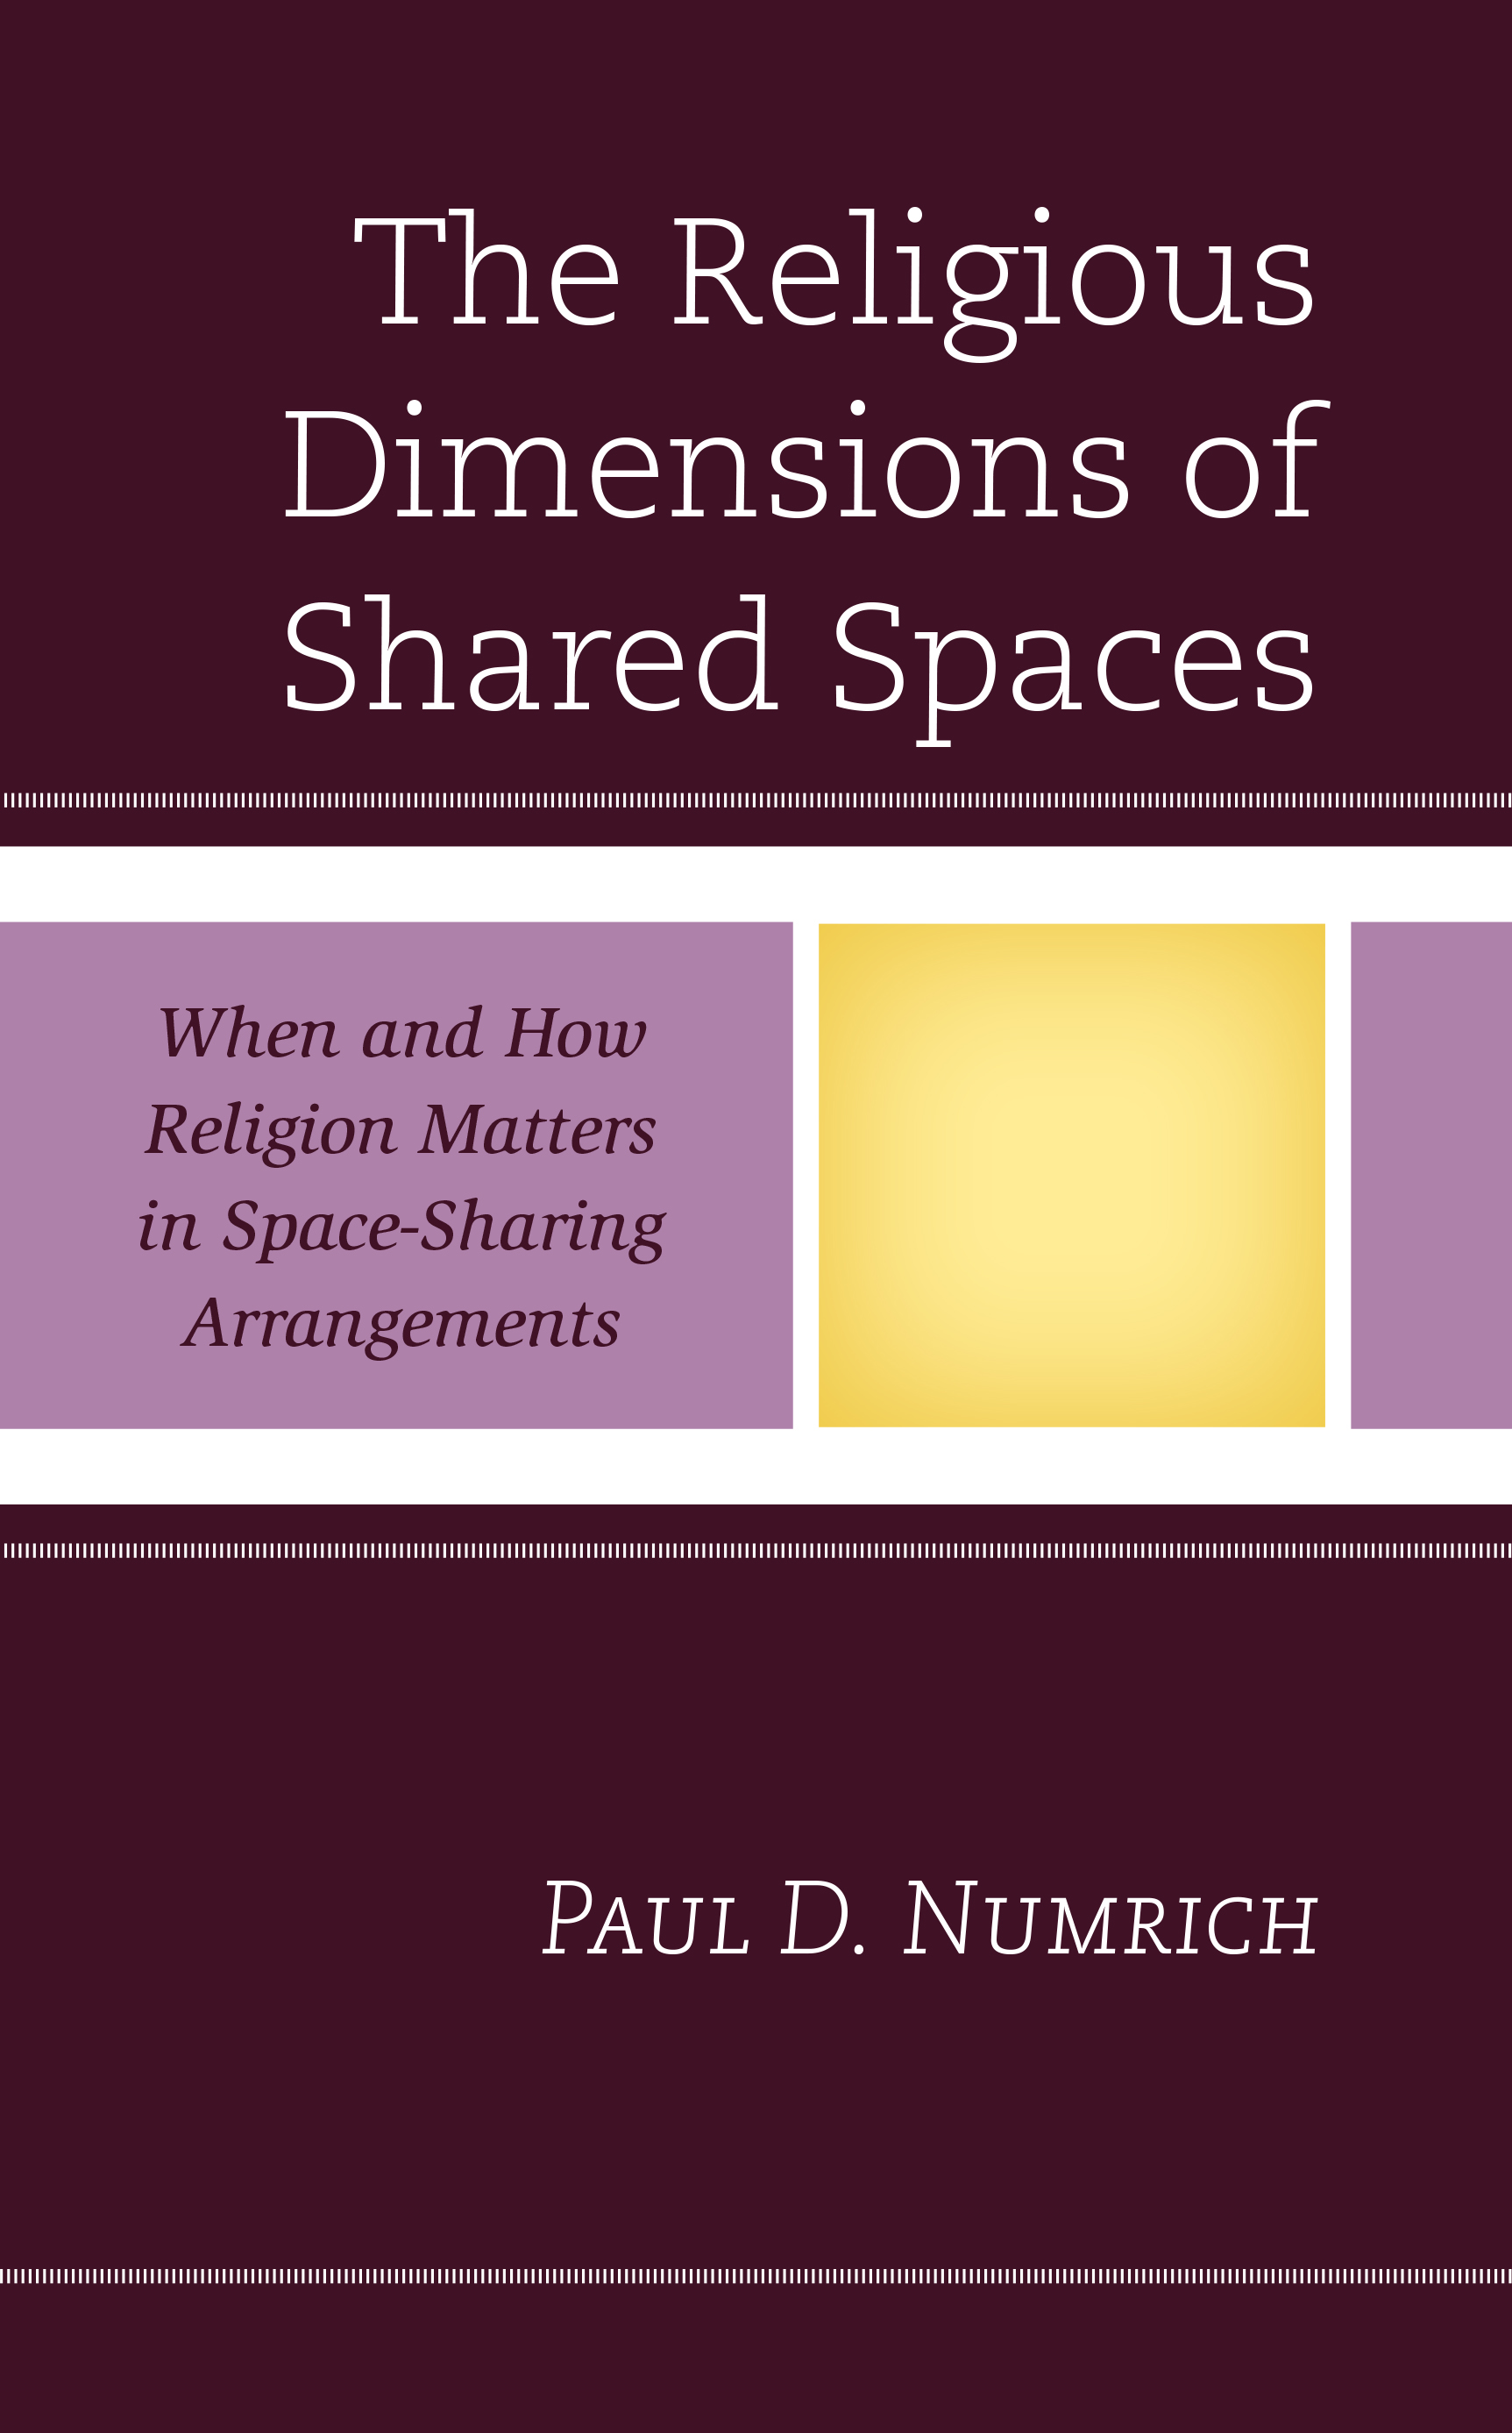 The Religious Dimensions of Shared Spaces: When and How Religion Matters in Space-Sharing Arrangements